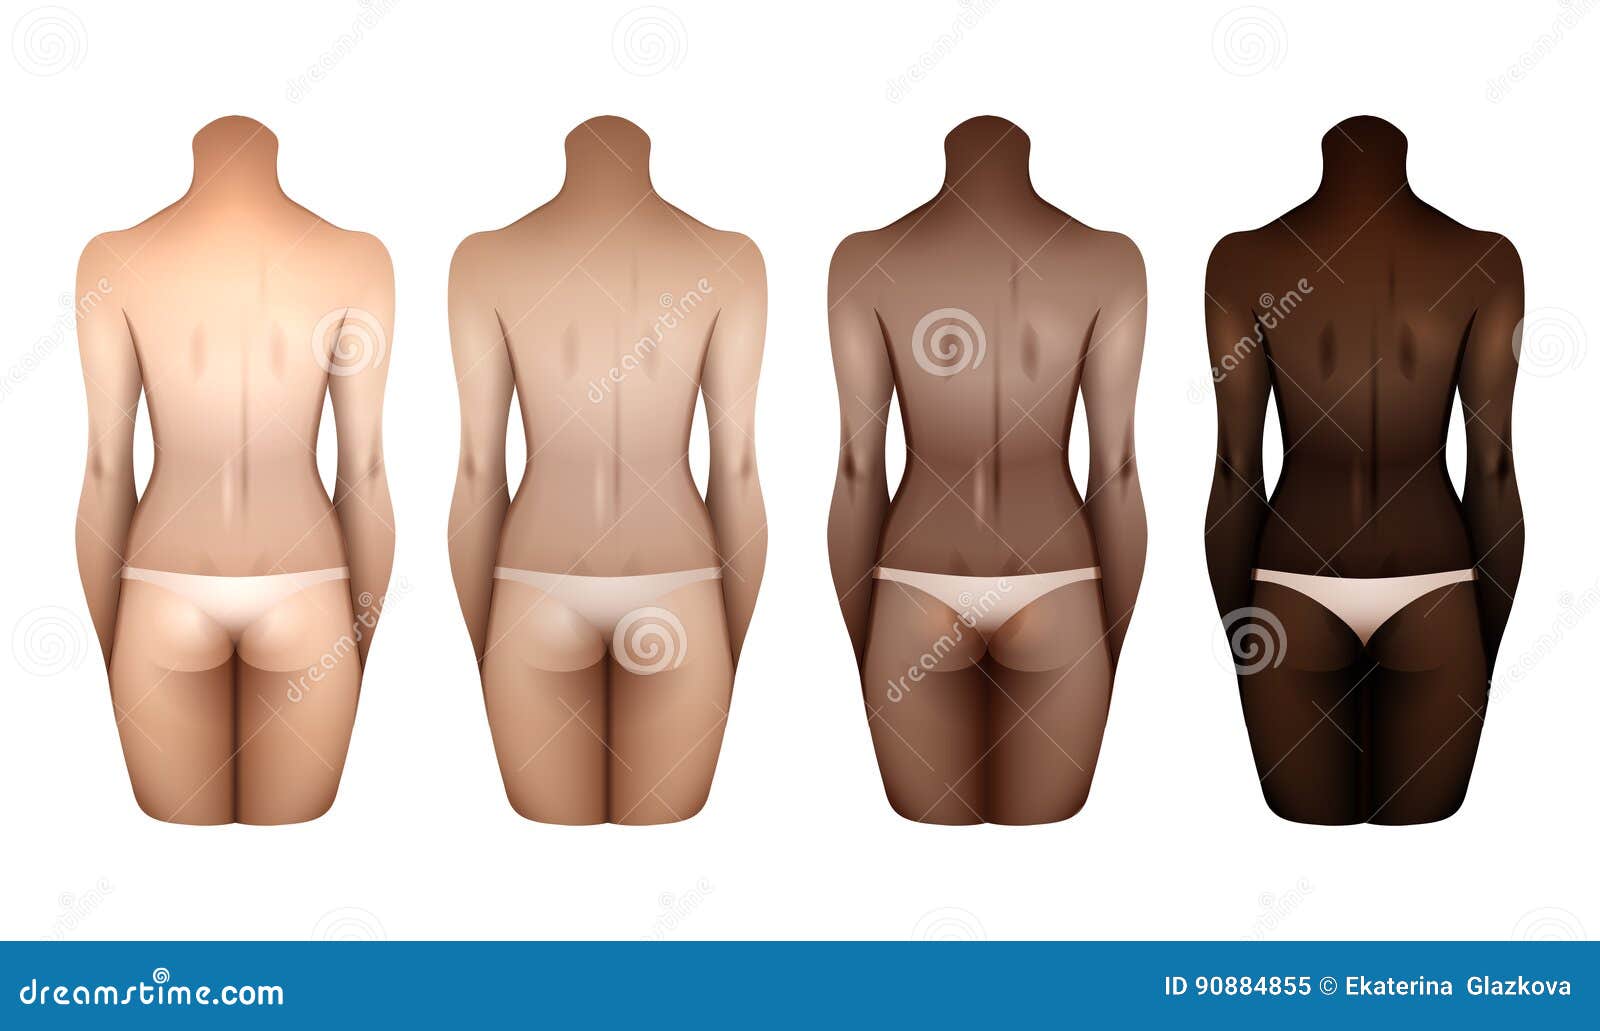 Female Body Templates Stock Illustration - Download Image Now